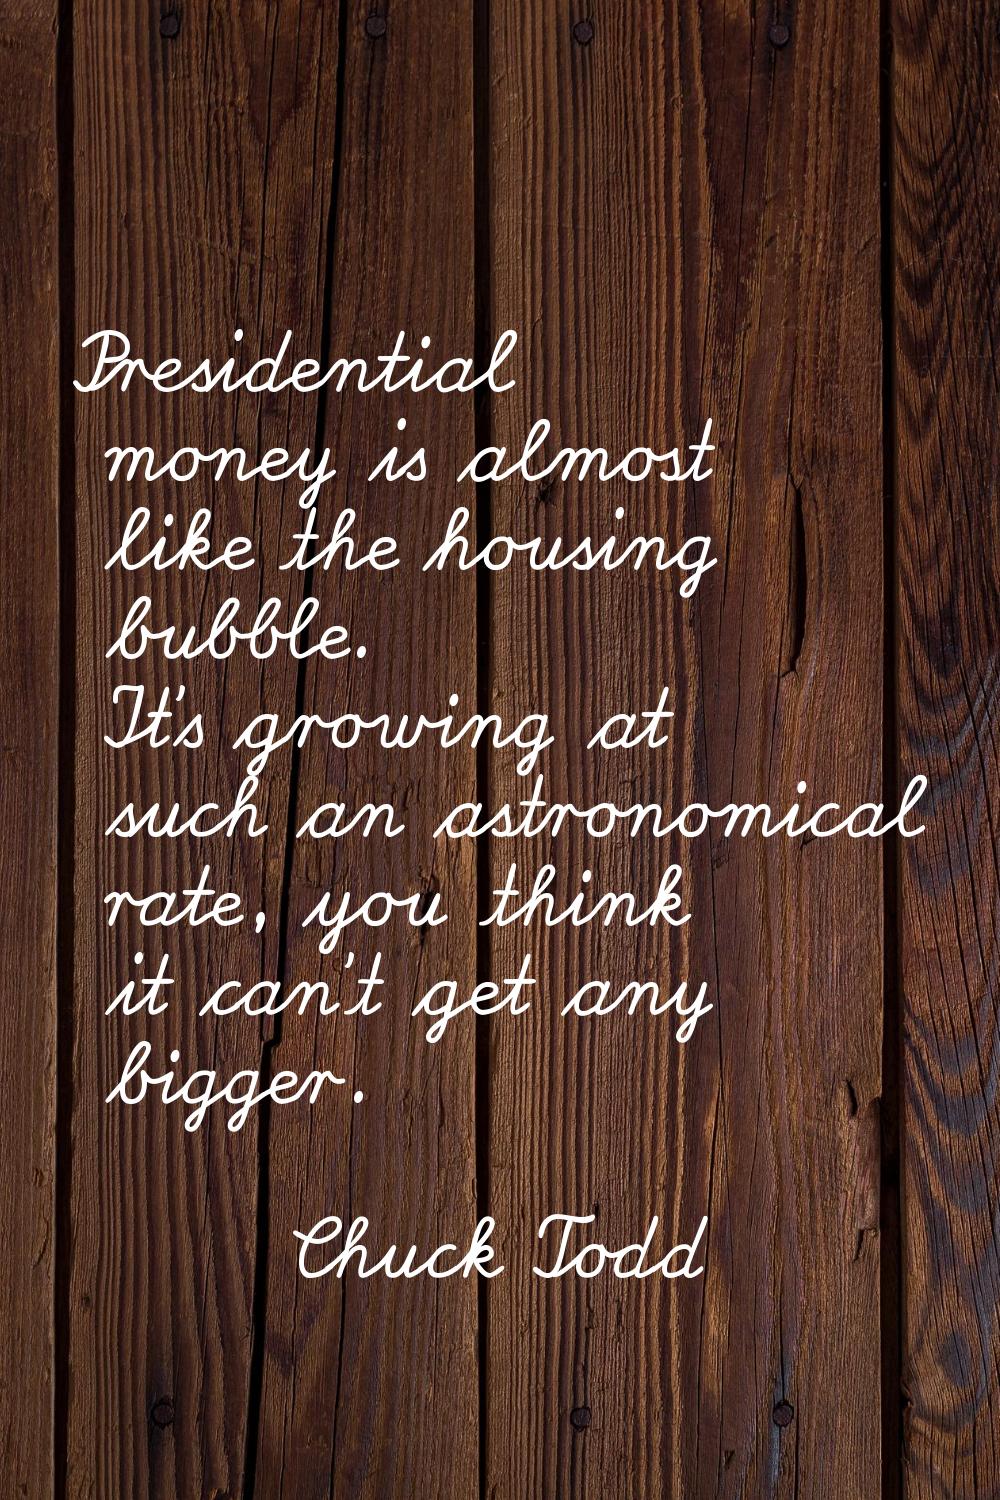 Presidential money is almost like the housing bubble. It's growing at such an astronomical rate, yo